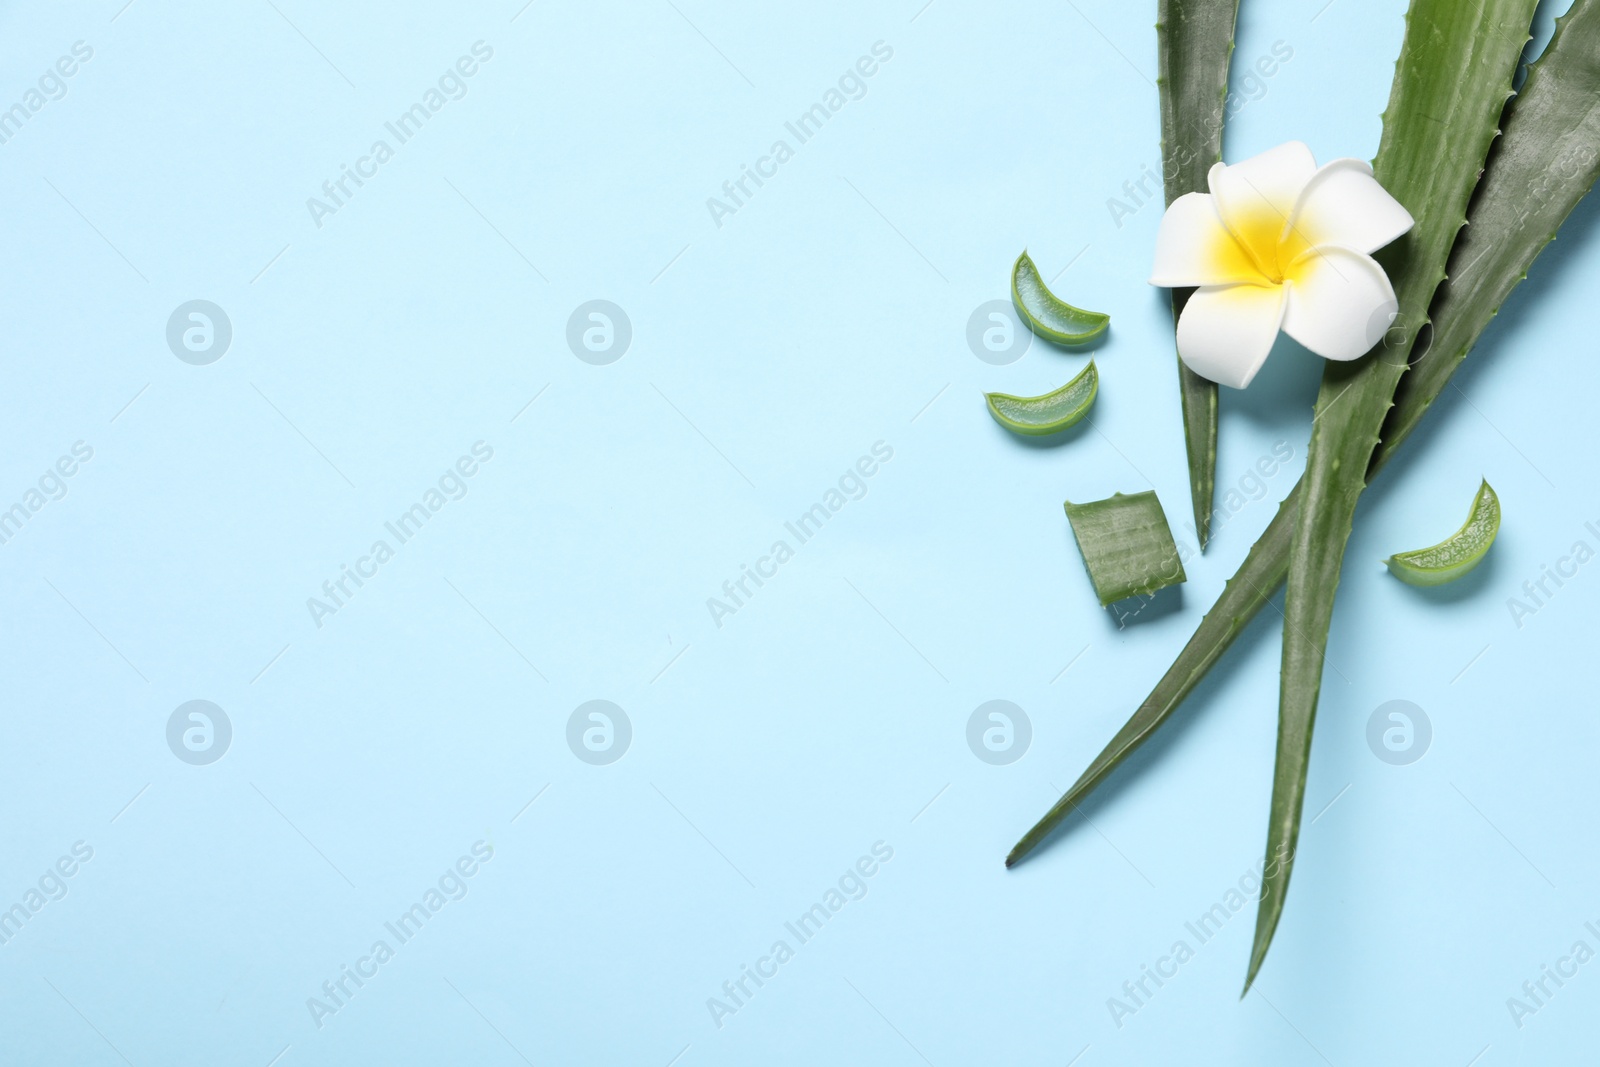 Photo of Cut aloe vera leaves and plumeria flower on light blue background, flat lay. Space for text